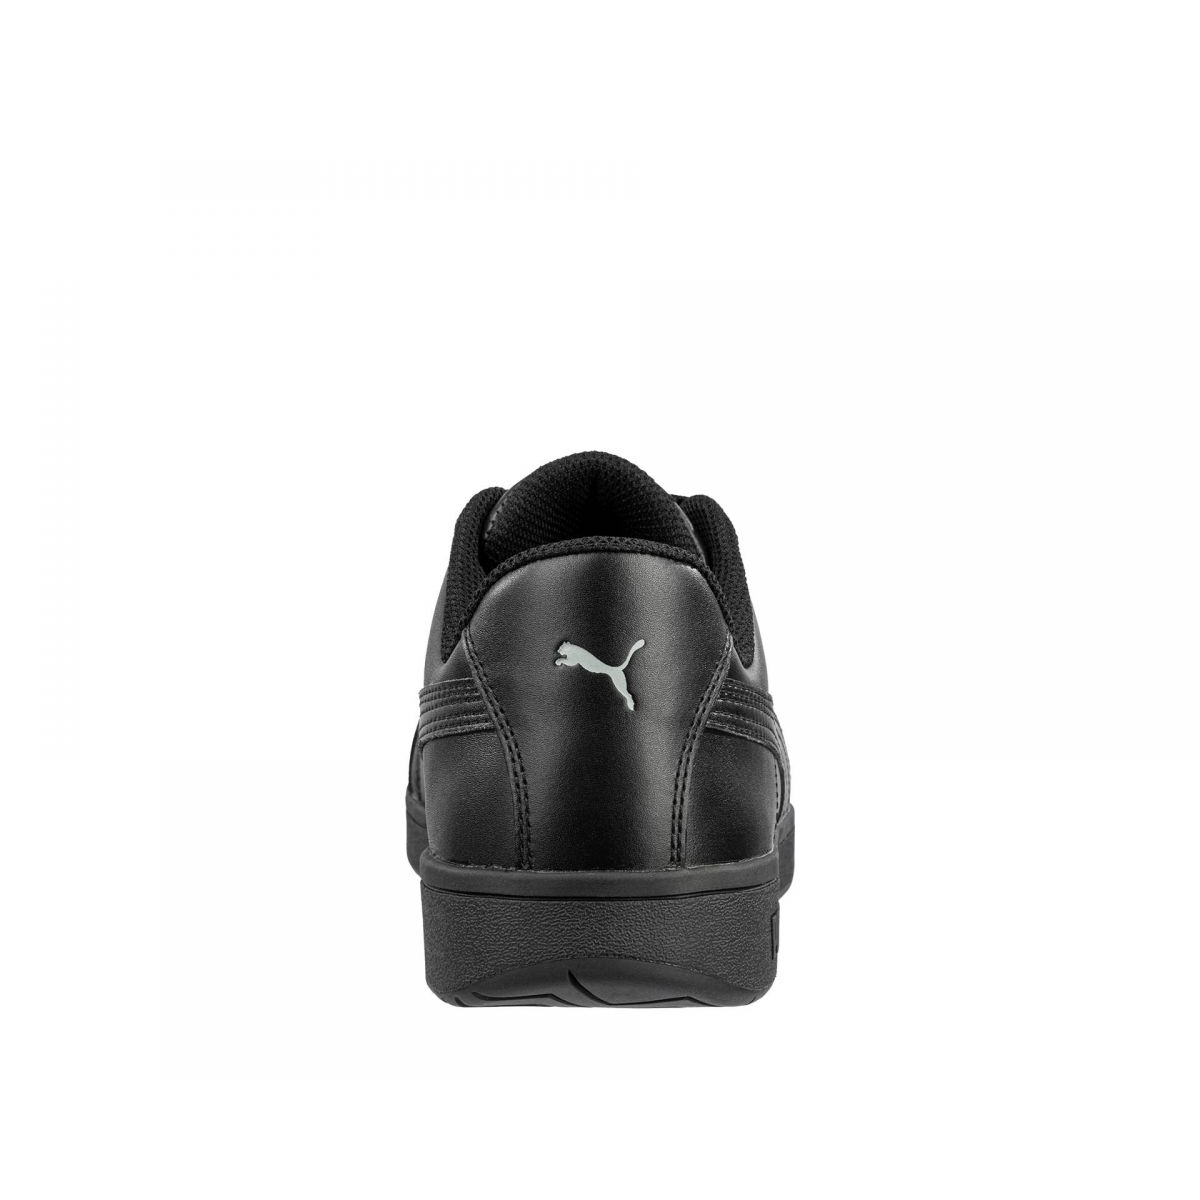 PUMA Safety Women's Iconic Low Composite Toe SD Work Shoes Smooth Black Leather - 640105 BLACK - BLACK, 7.5